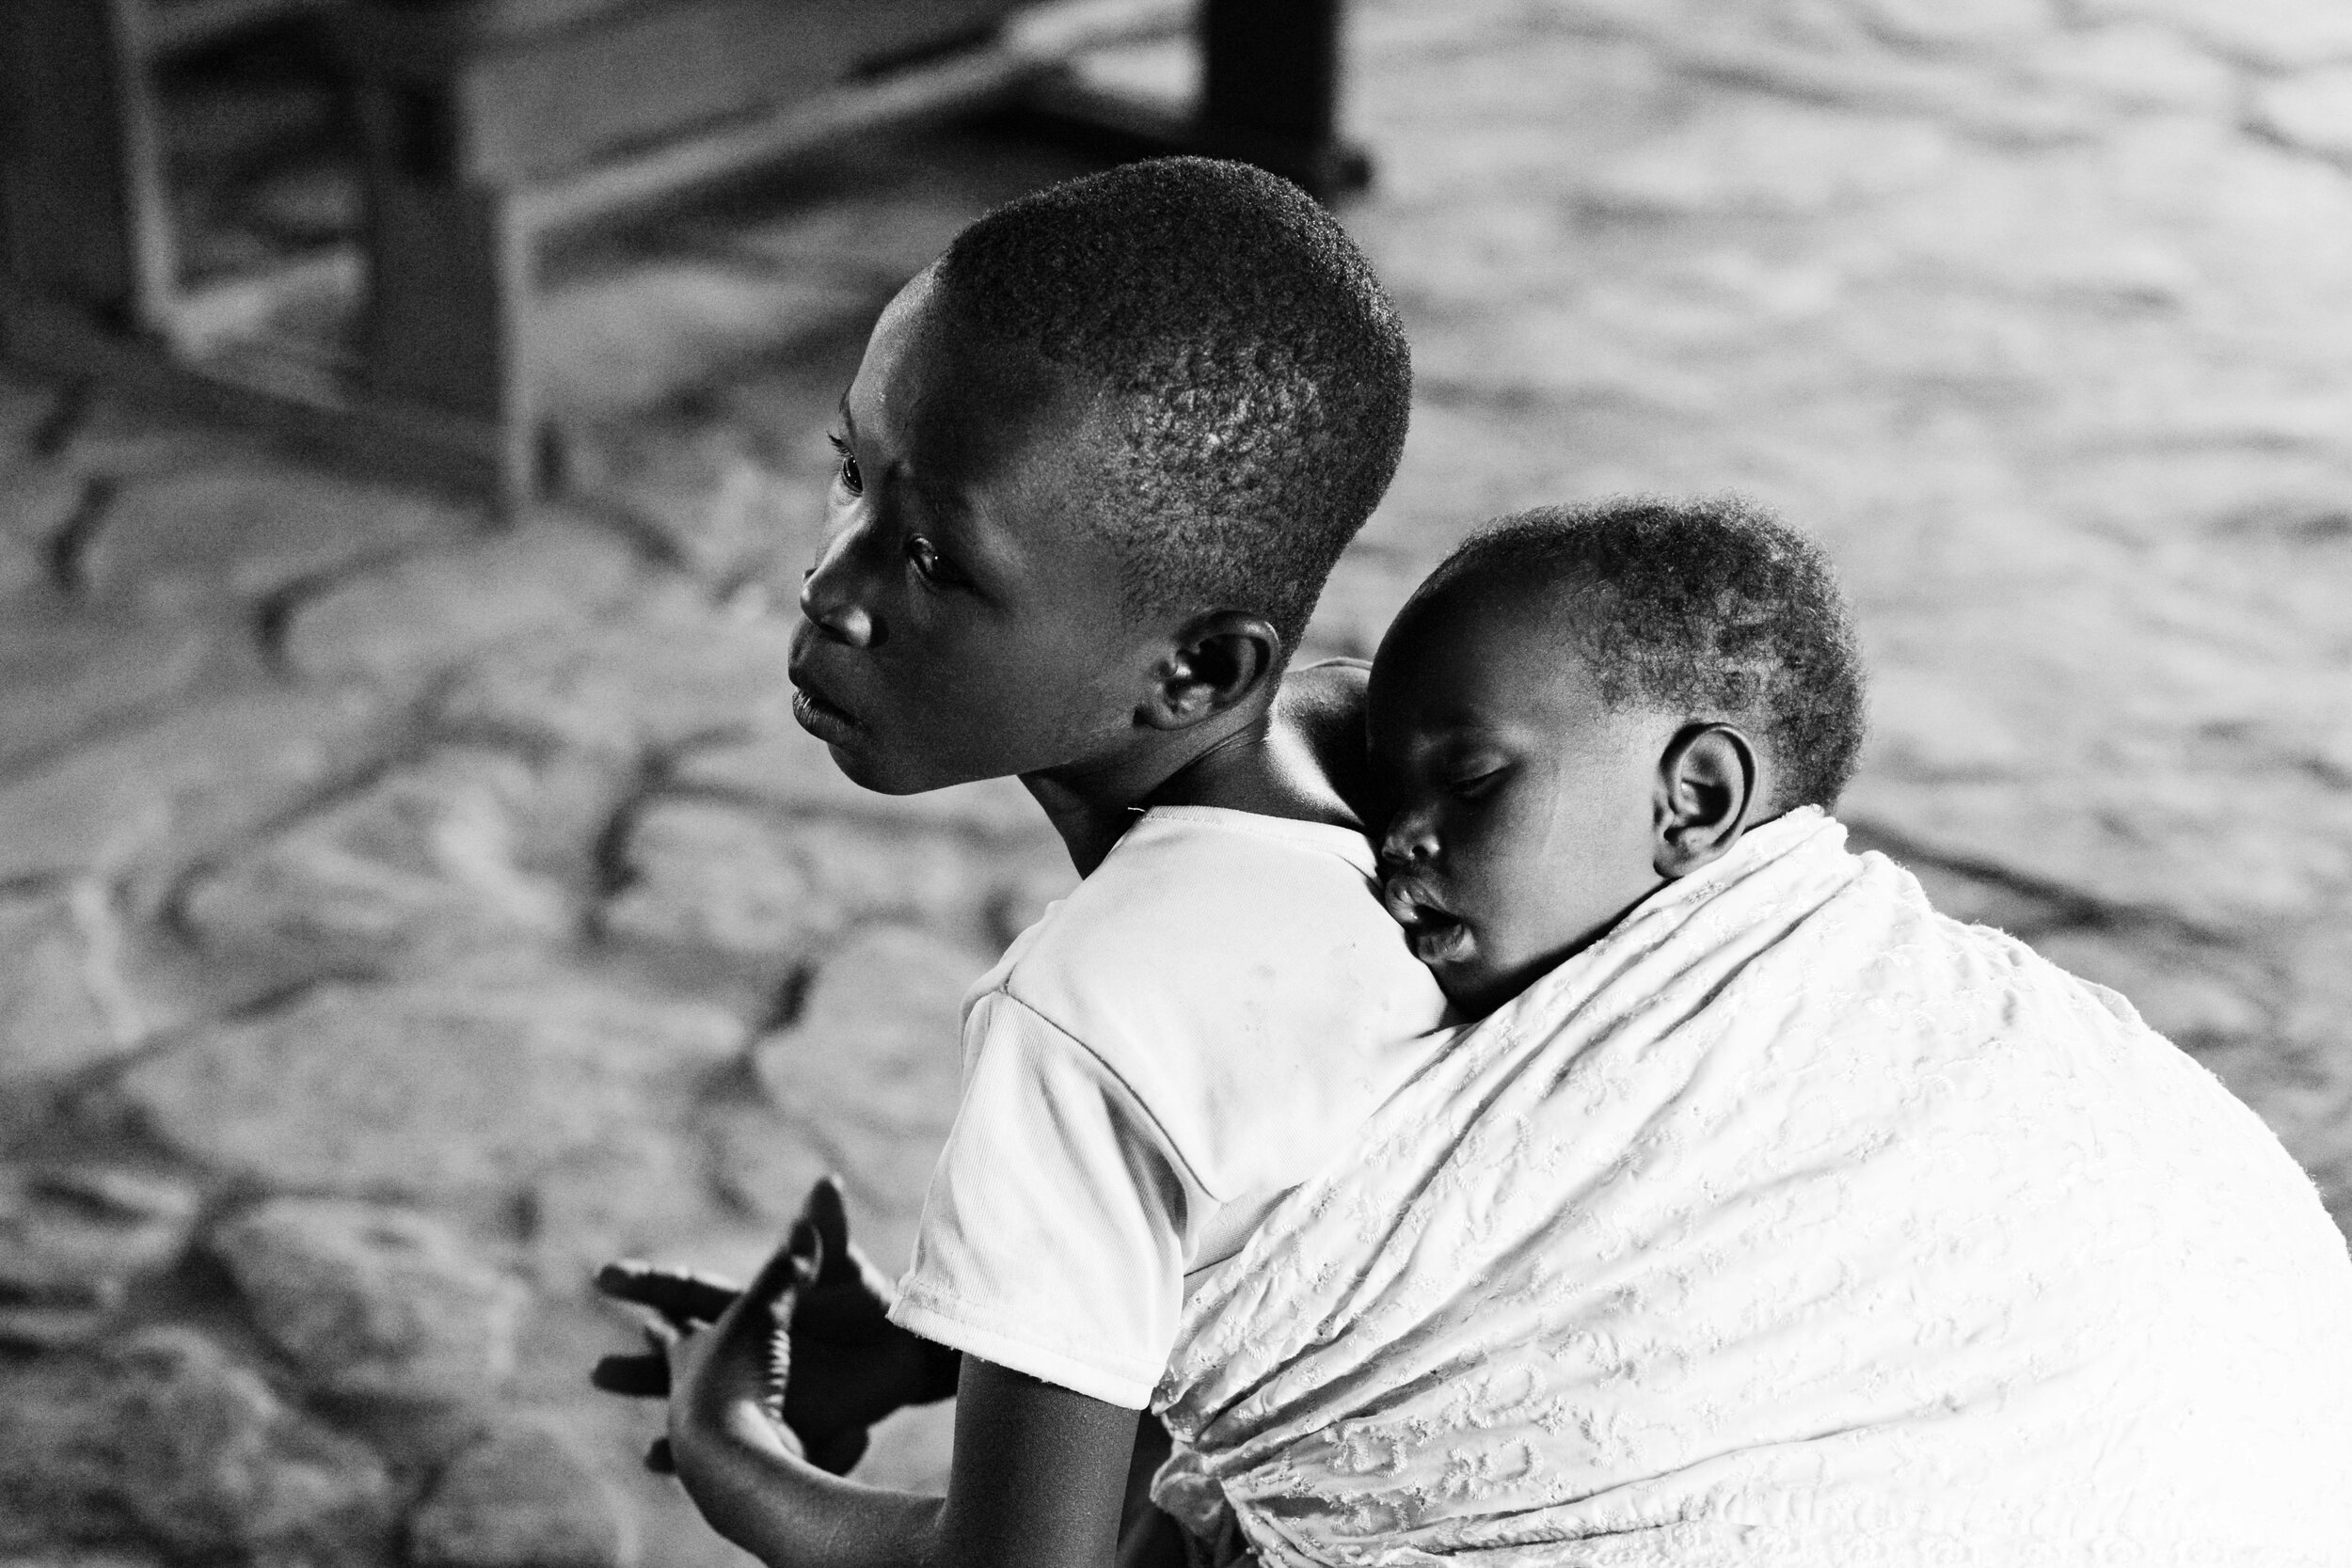  Children in Rwanda assume responsibilities at a very young age. Taking care of one’s younger siblings is a childhood reality for both girls and boys.  